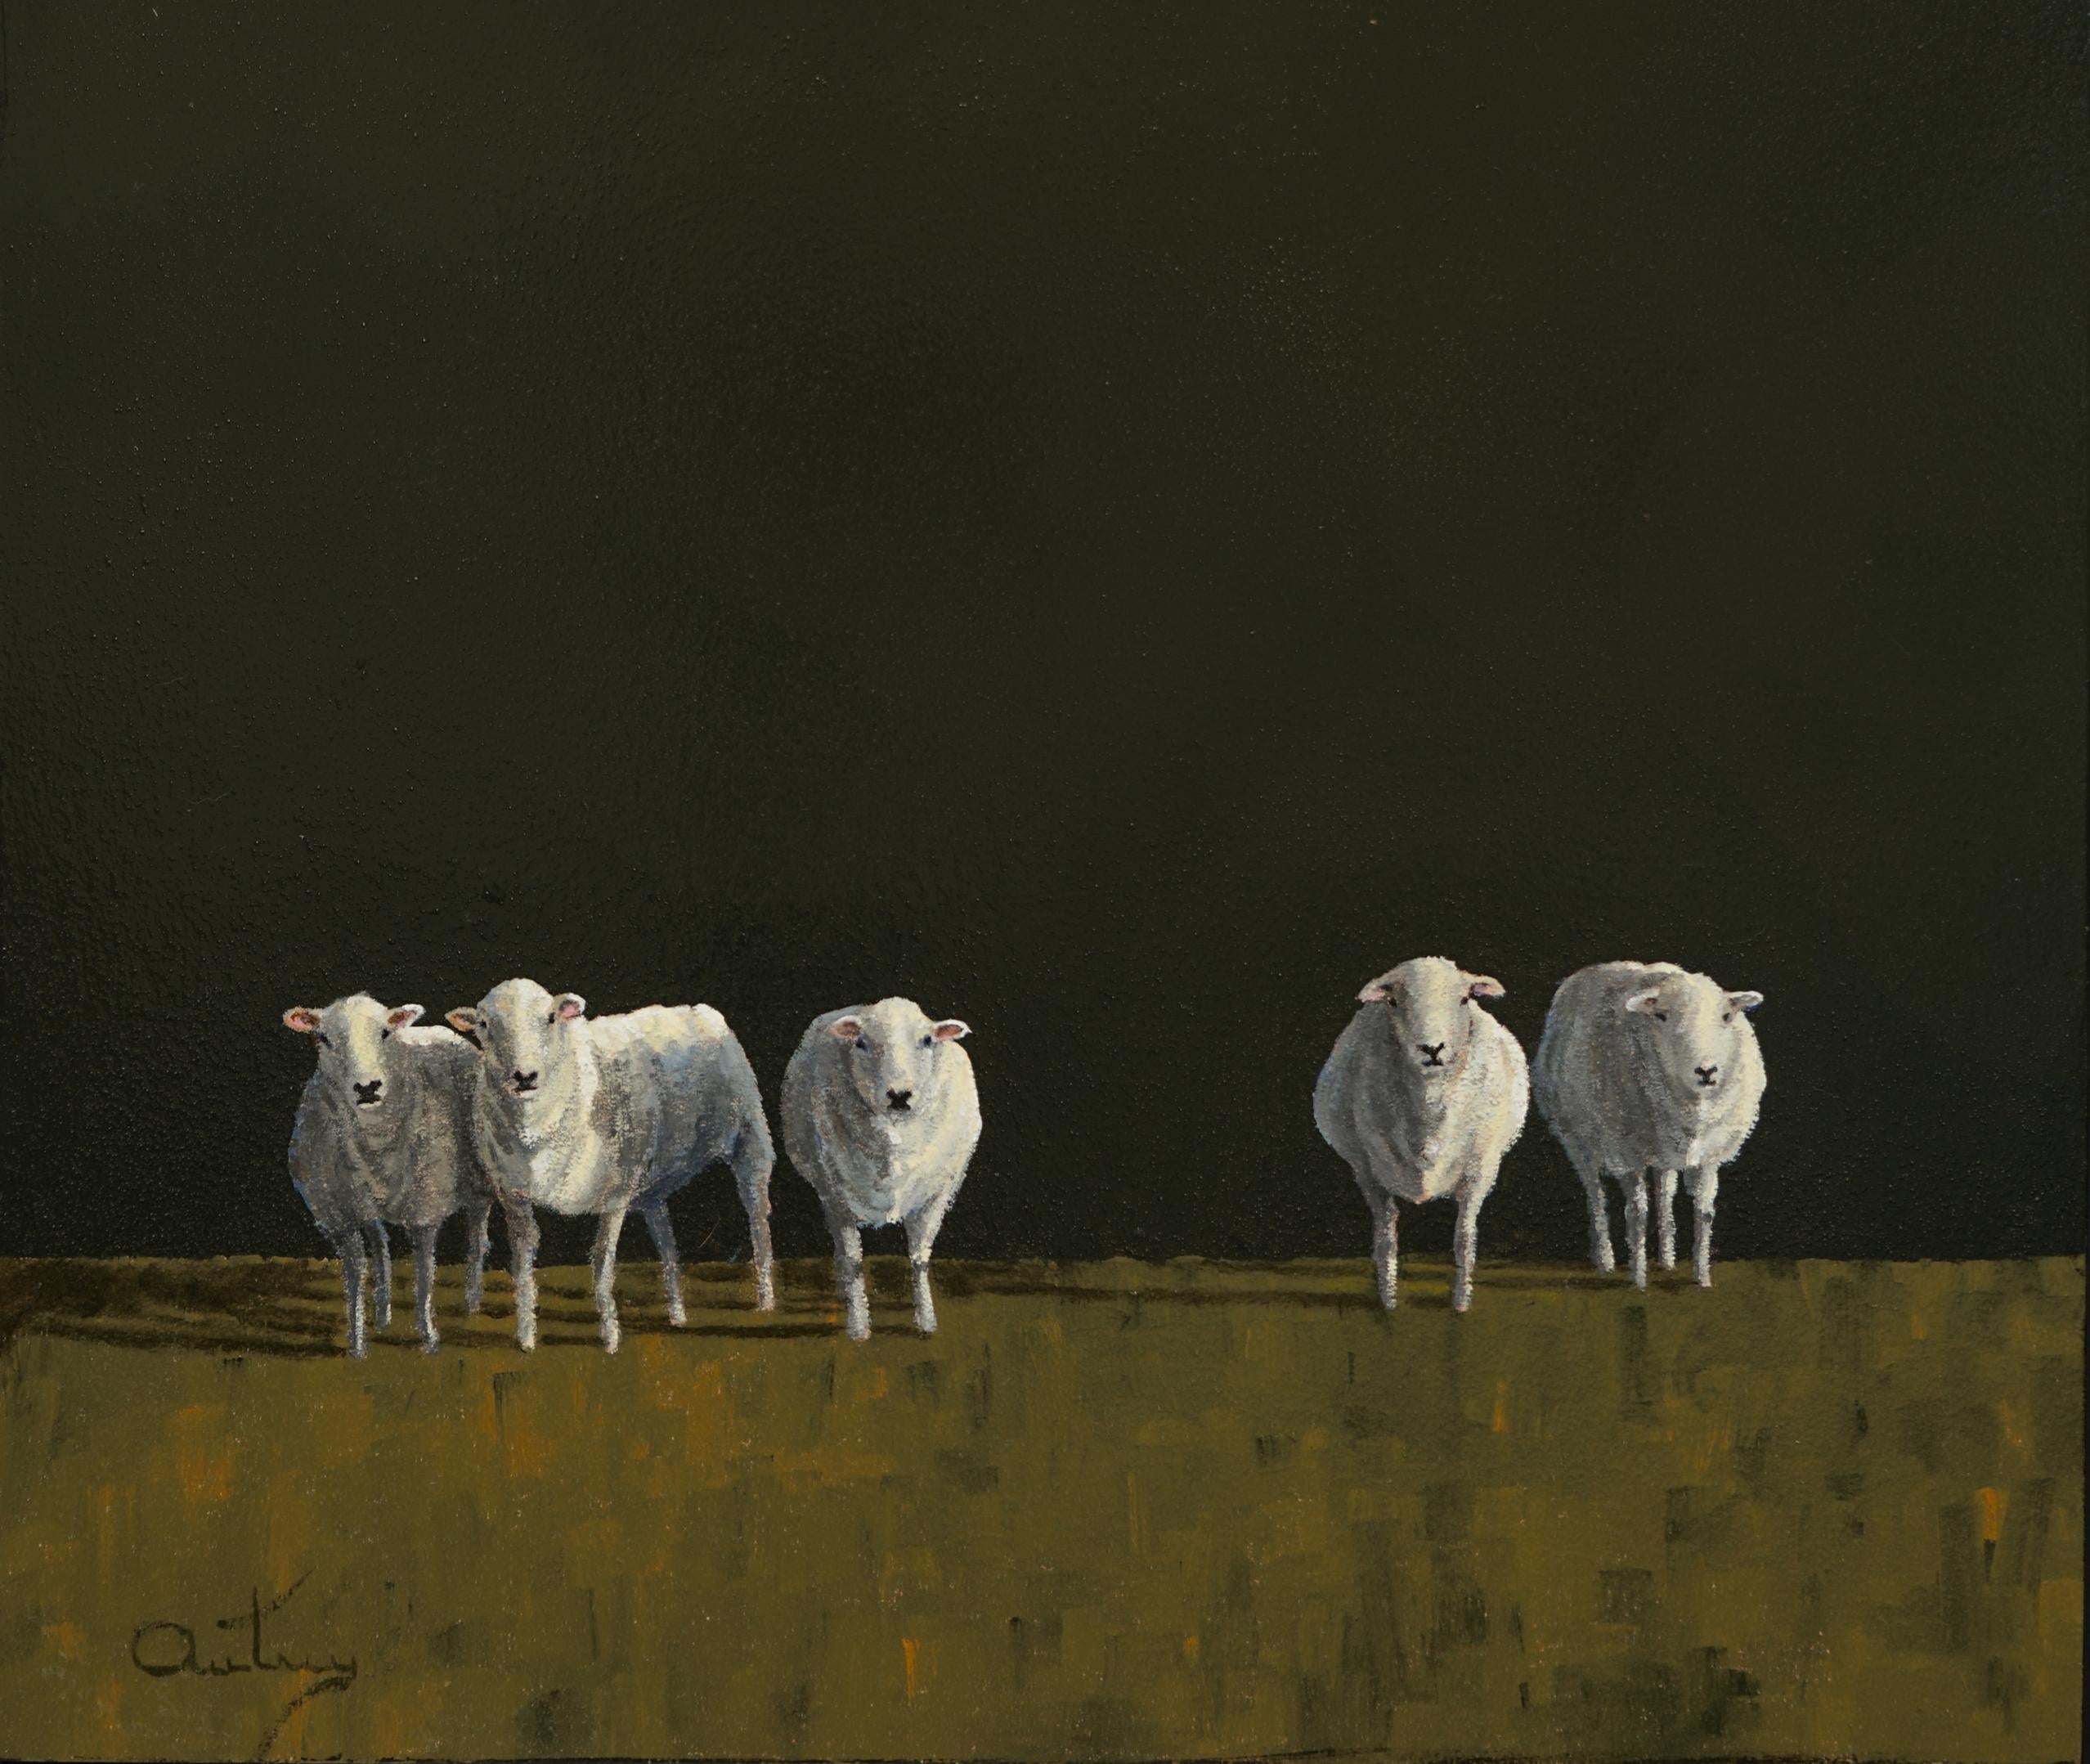   LOOK FOR FREE SHIPPING AT CHECKOUT. 

A Gathering  is an 18 x 14 oil on panel painting of sheep who look as if they are in  search of something. A Gathering is by Texas artist Luke Autrey who lives and paints in Austin, Texas. In this painting 